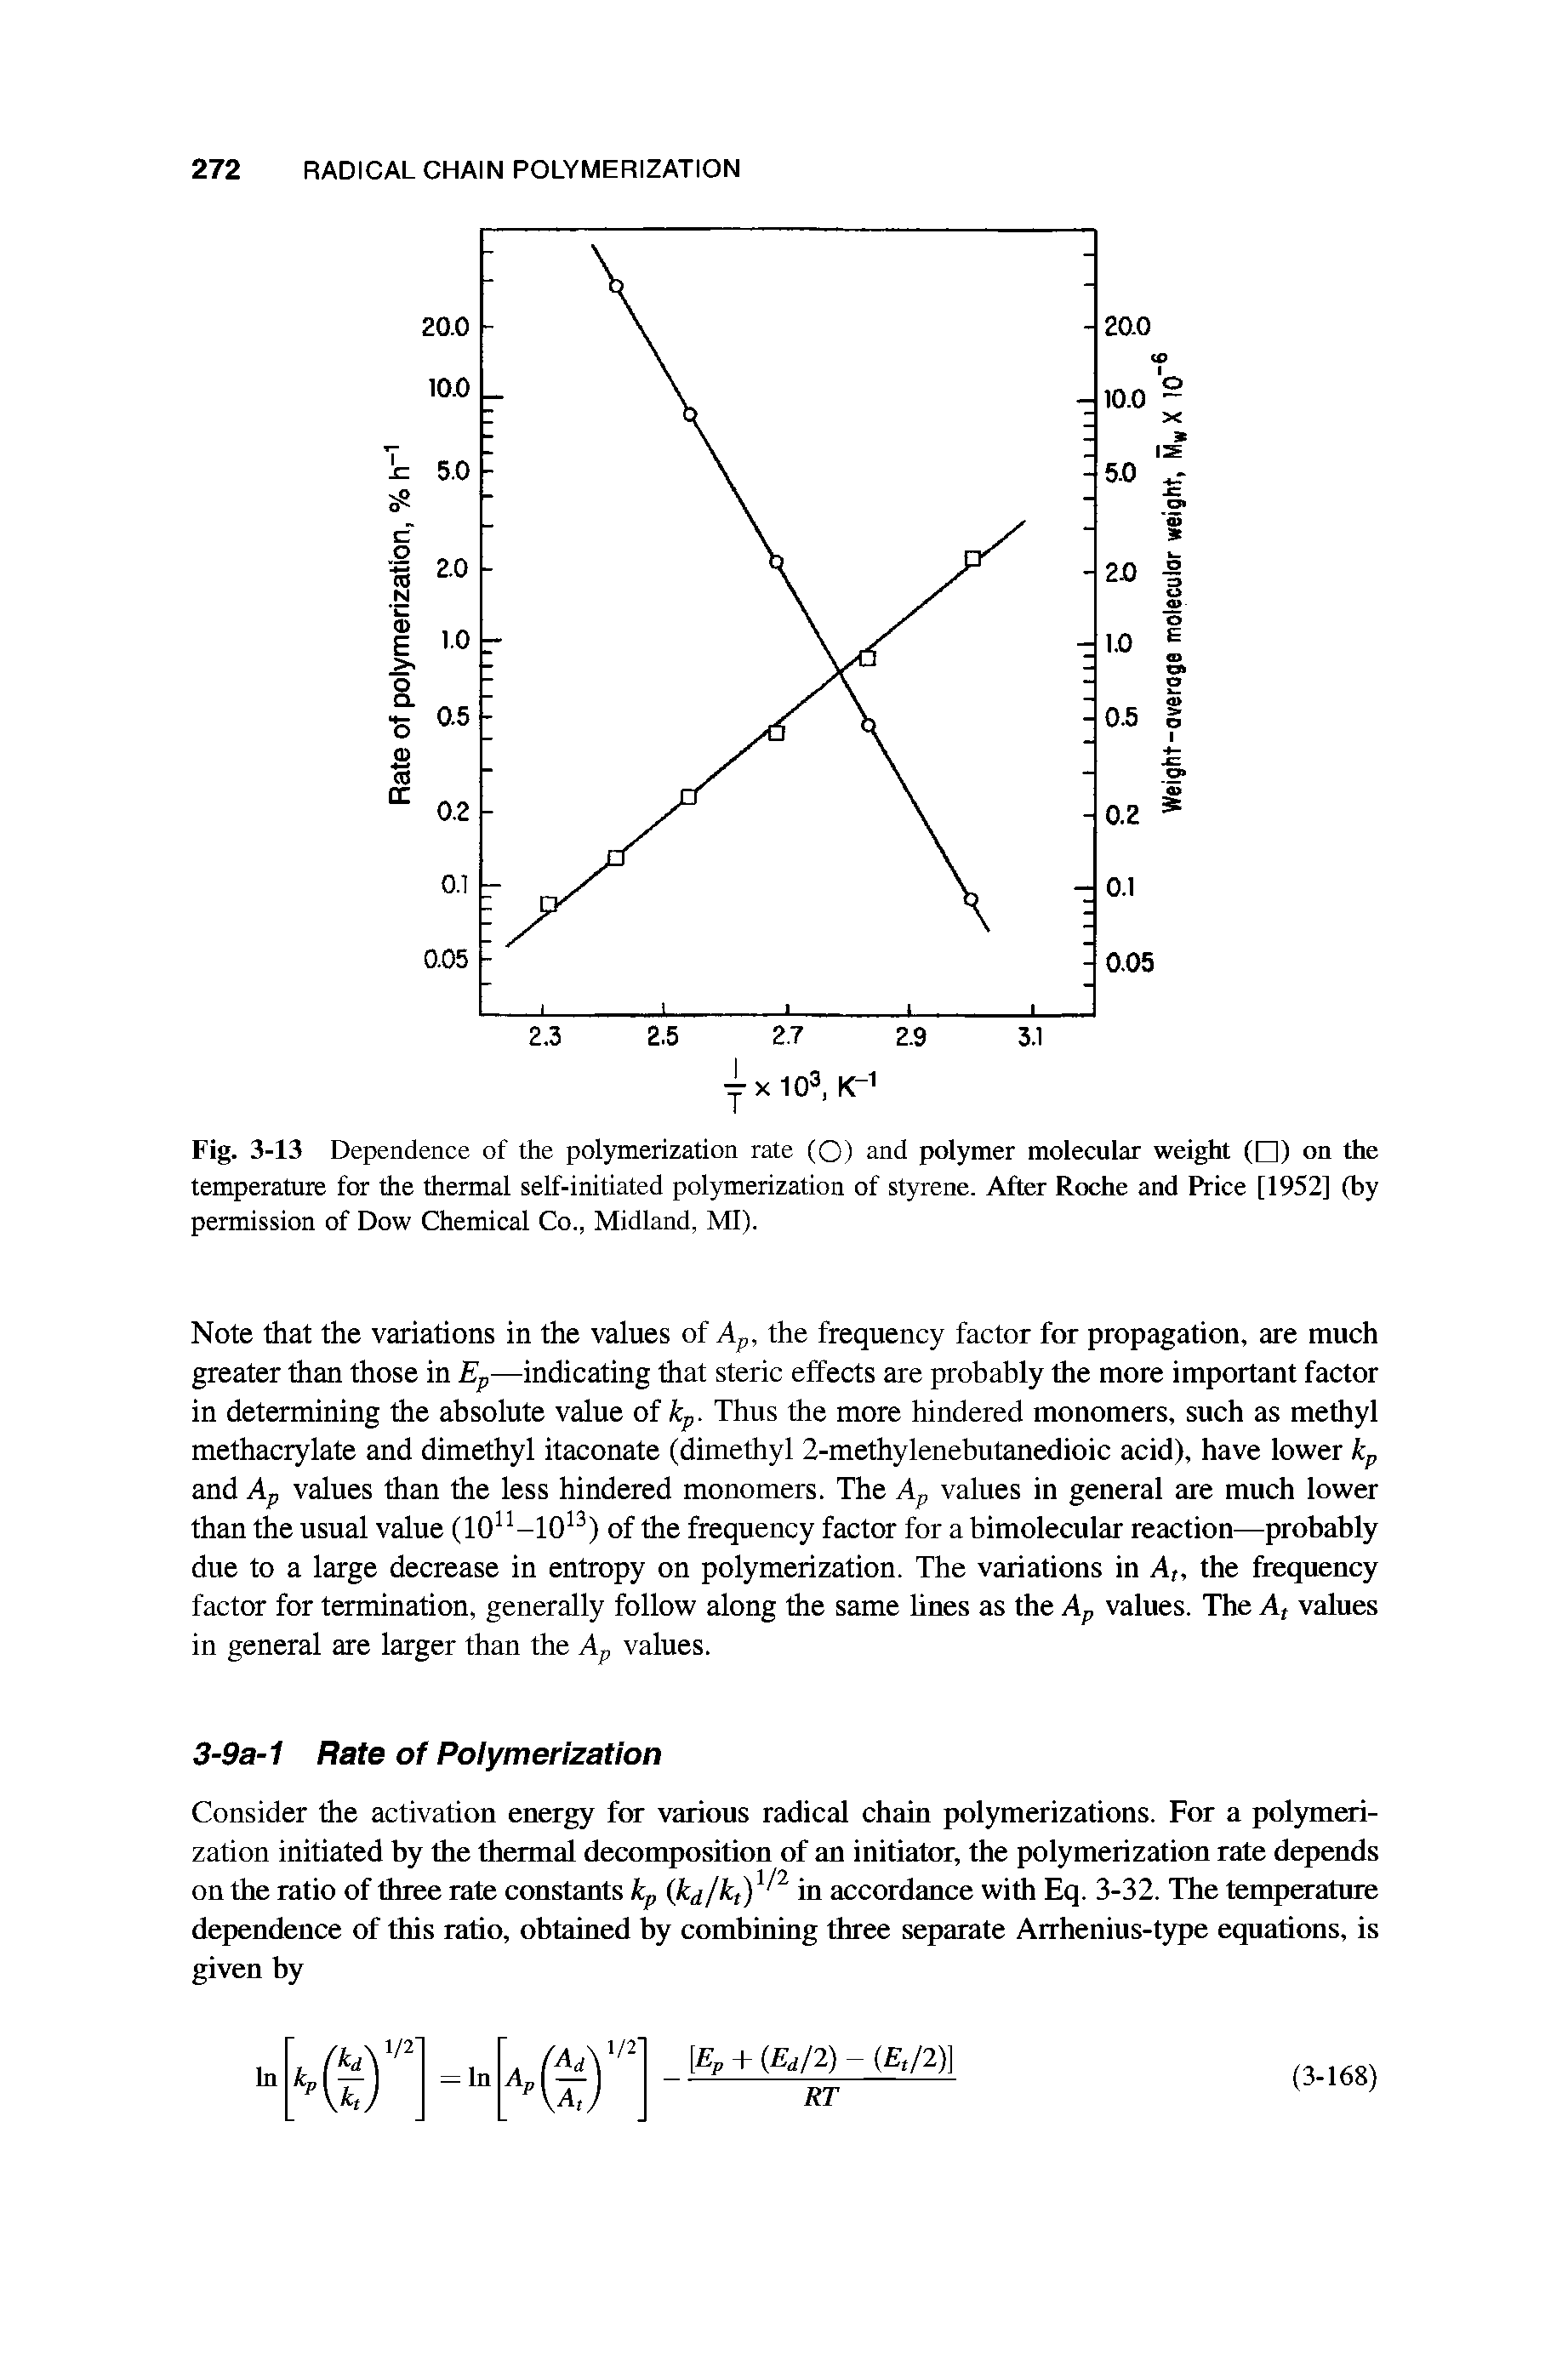 Fig. 3-13 Dependence of the polymerization rate (O) and polymer molecular weight ( ) on the temperature for the thermal self-initiated polymerization of styrene. After Roche and Price [1952] (by permission of Dow Chemical Co., Midland, MI).